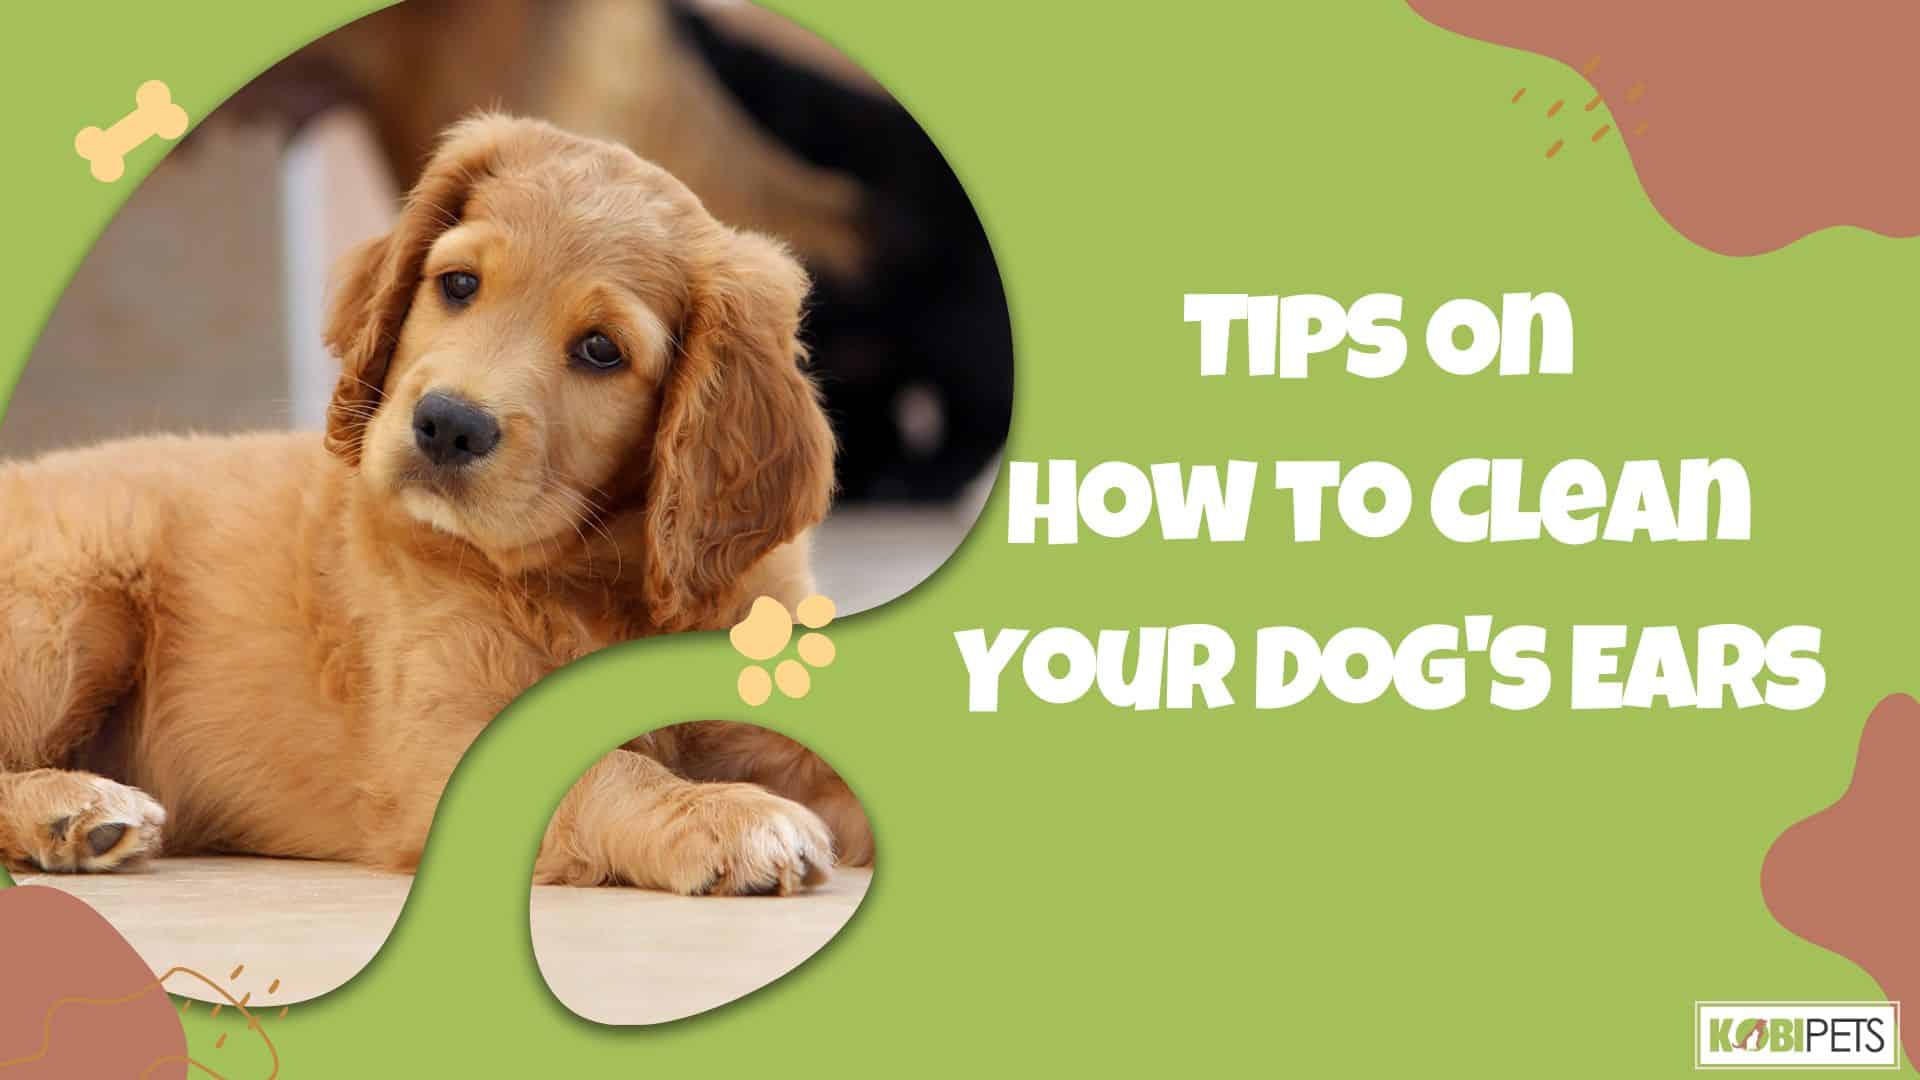 Tips On How to Clean Your Dog's Ears